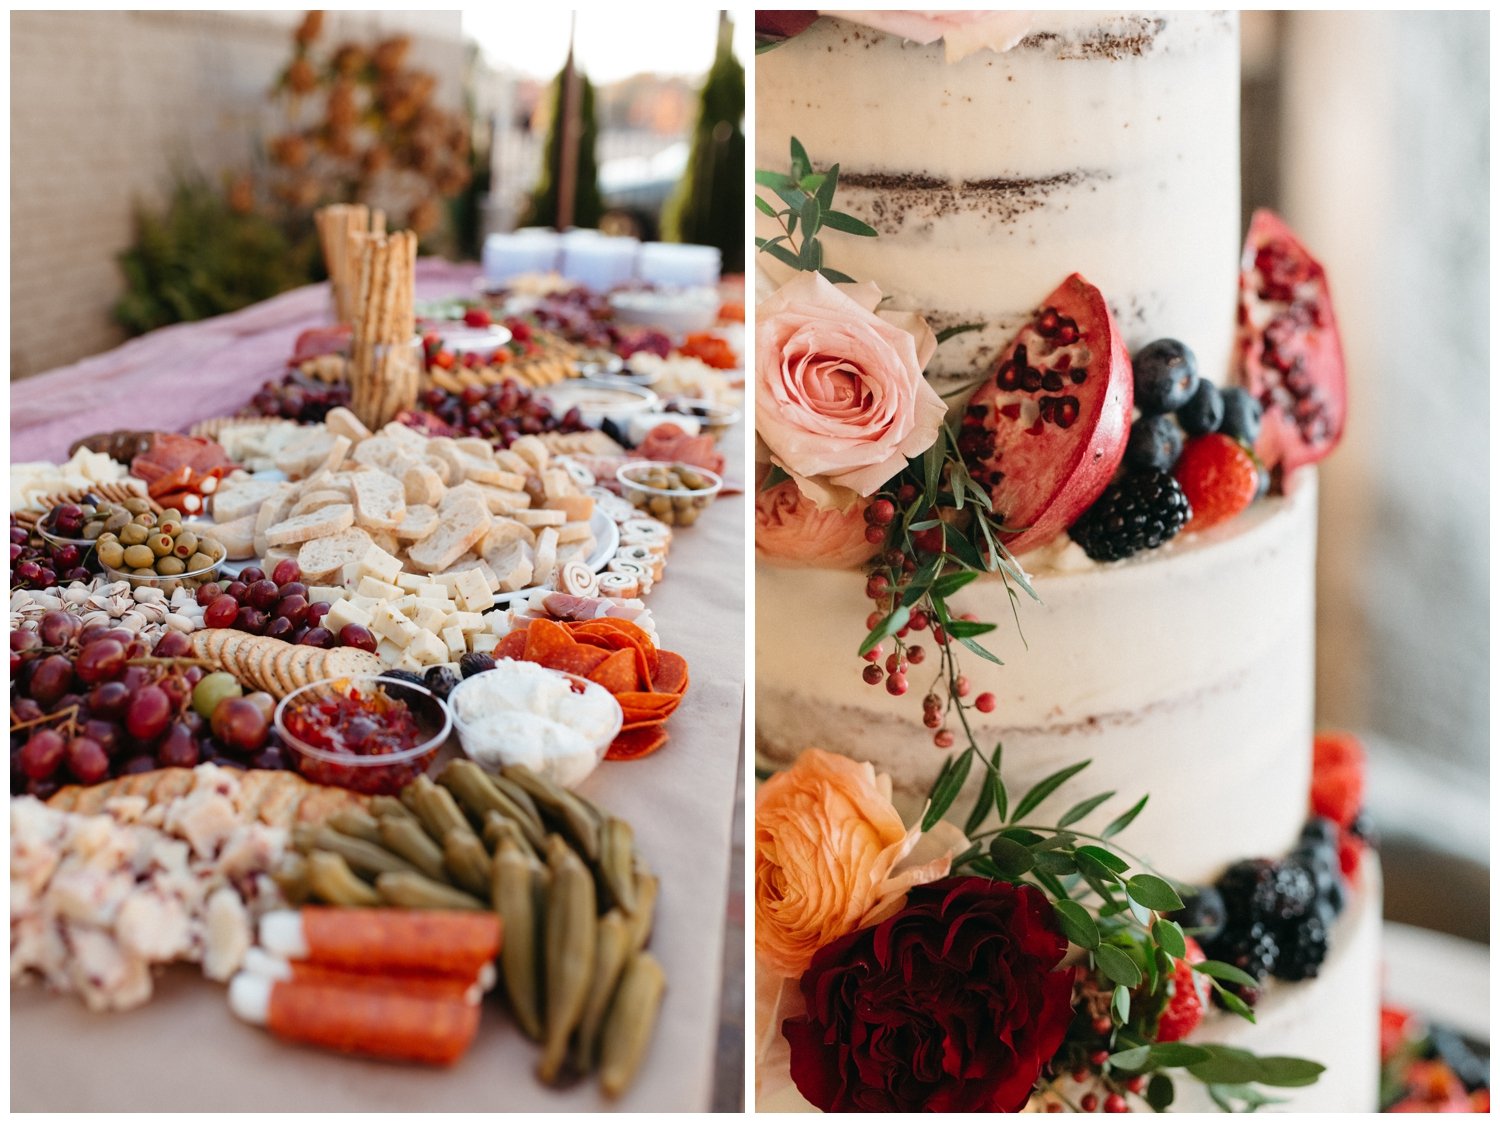 Detail photographs of appetizers and cake for small wedding reception ideas